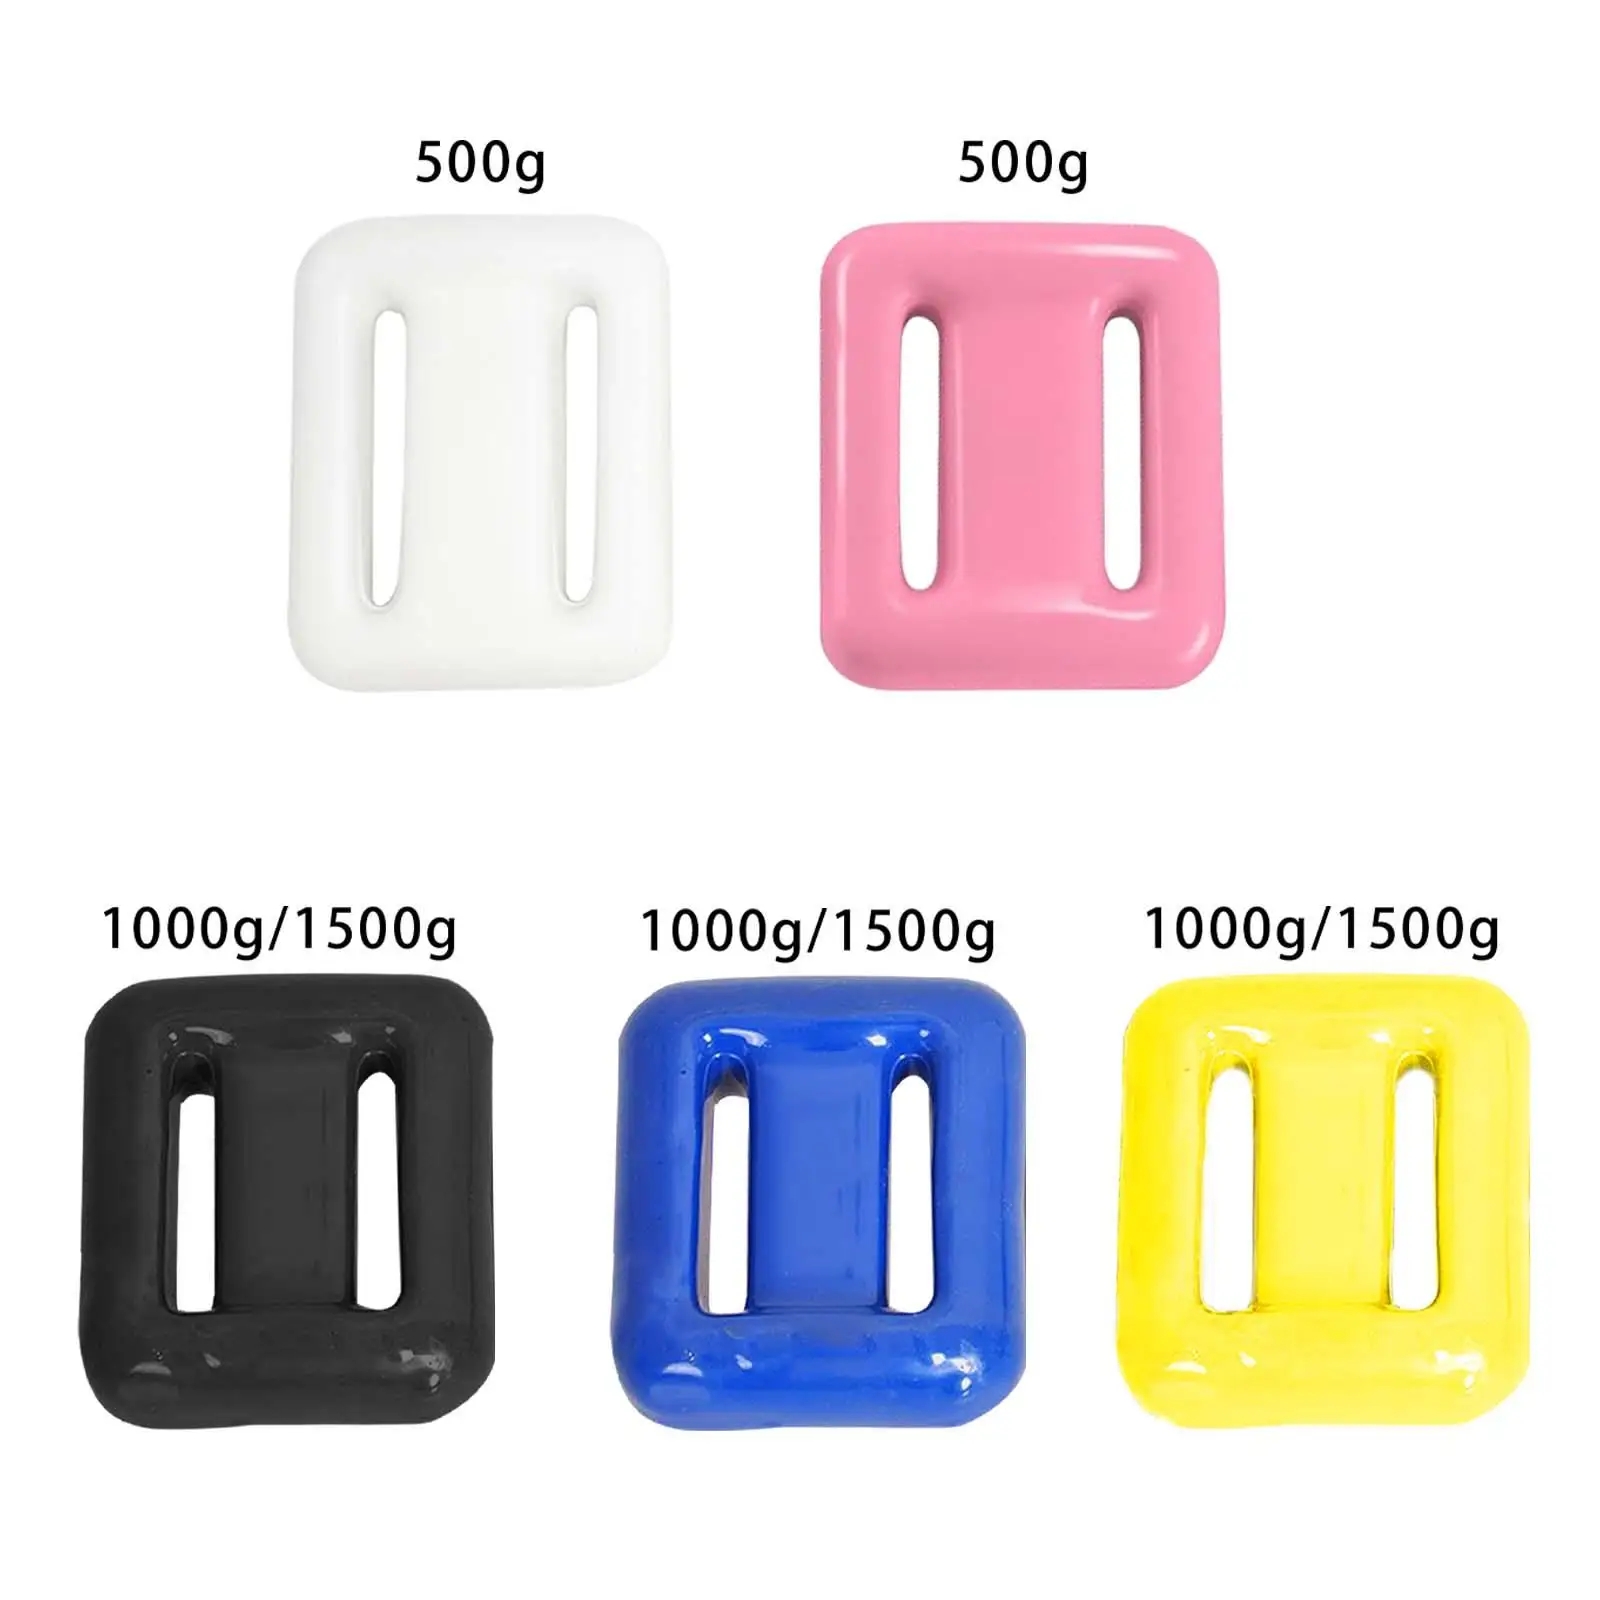 Soft Scuba Weights 500G to 1500G PVC Equipment Parts Coated Counterweight Non Slip for Diving Swimming Sport Weight Belt